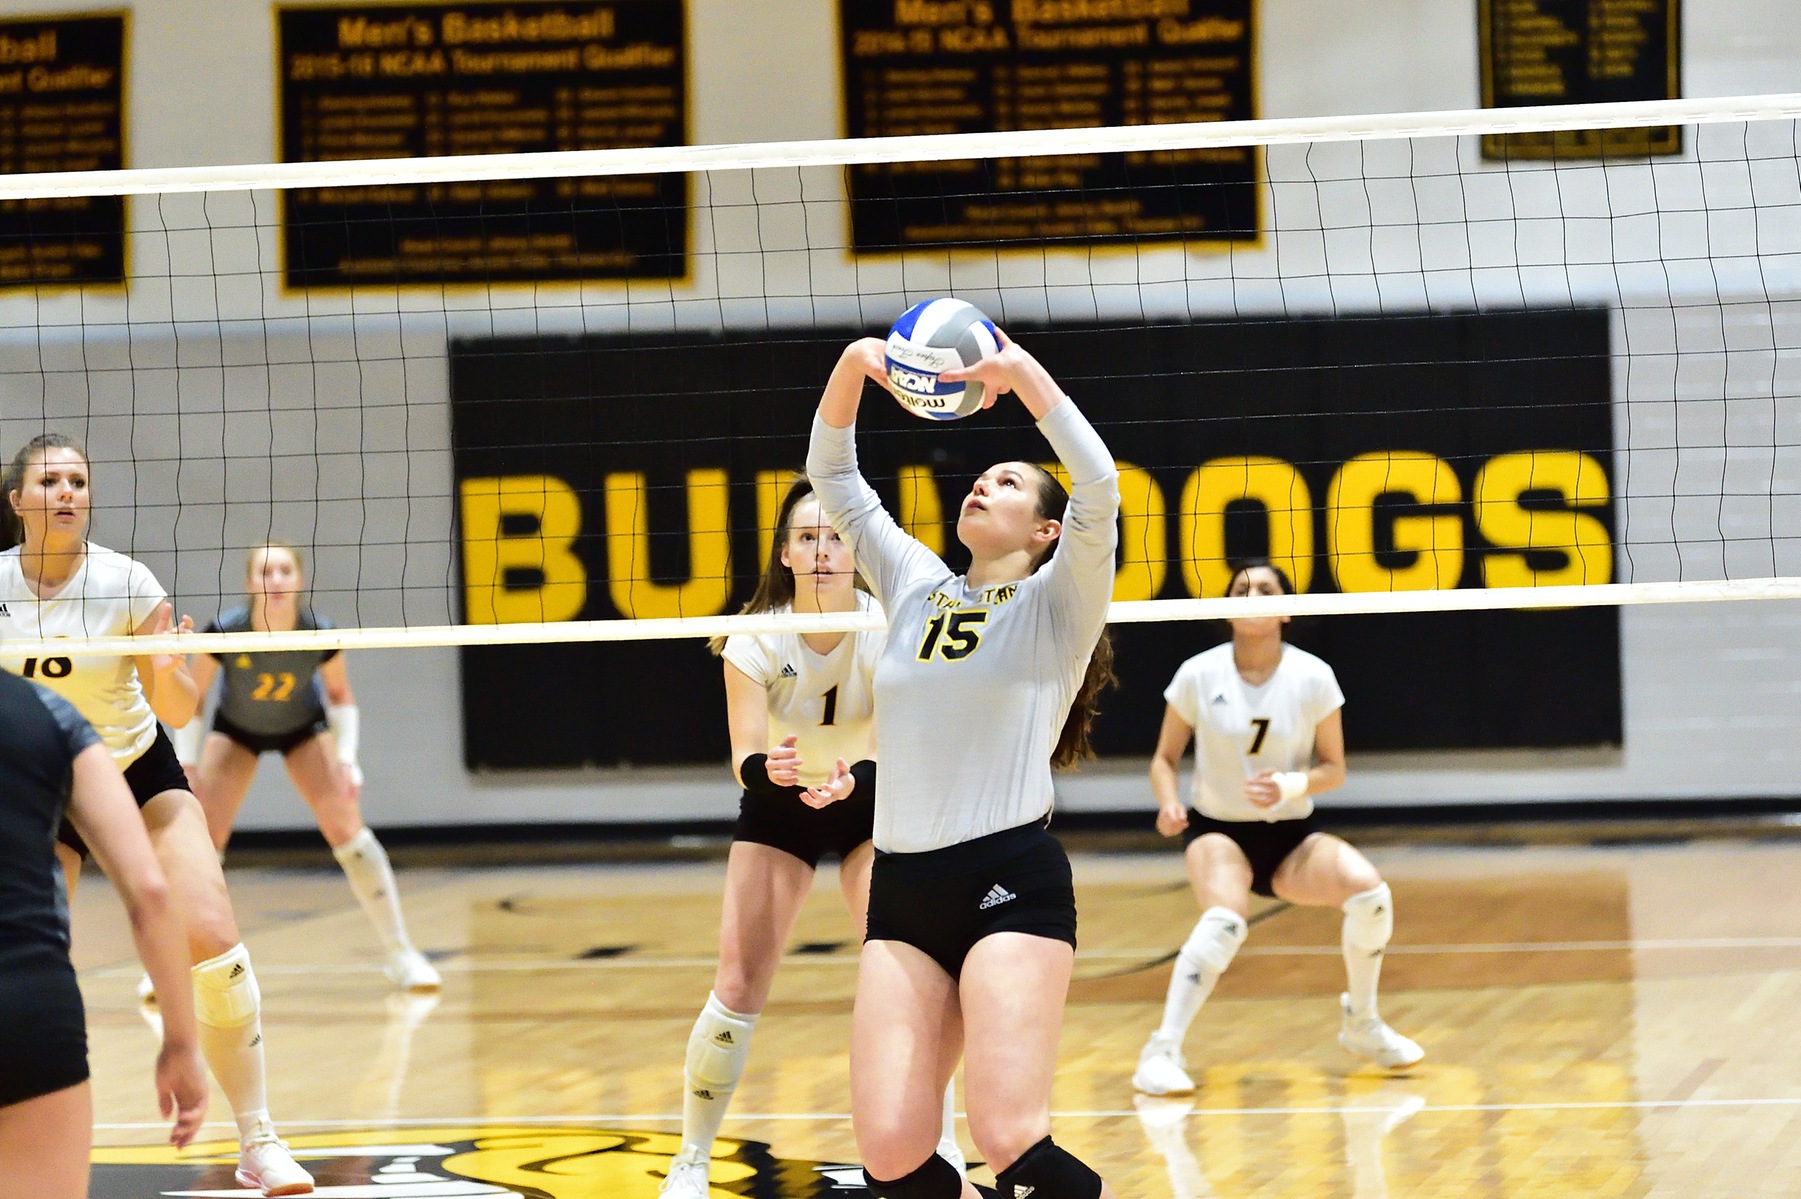 All-SCAC Volleyball Duo Leads Pirates Past Texas Lutheran